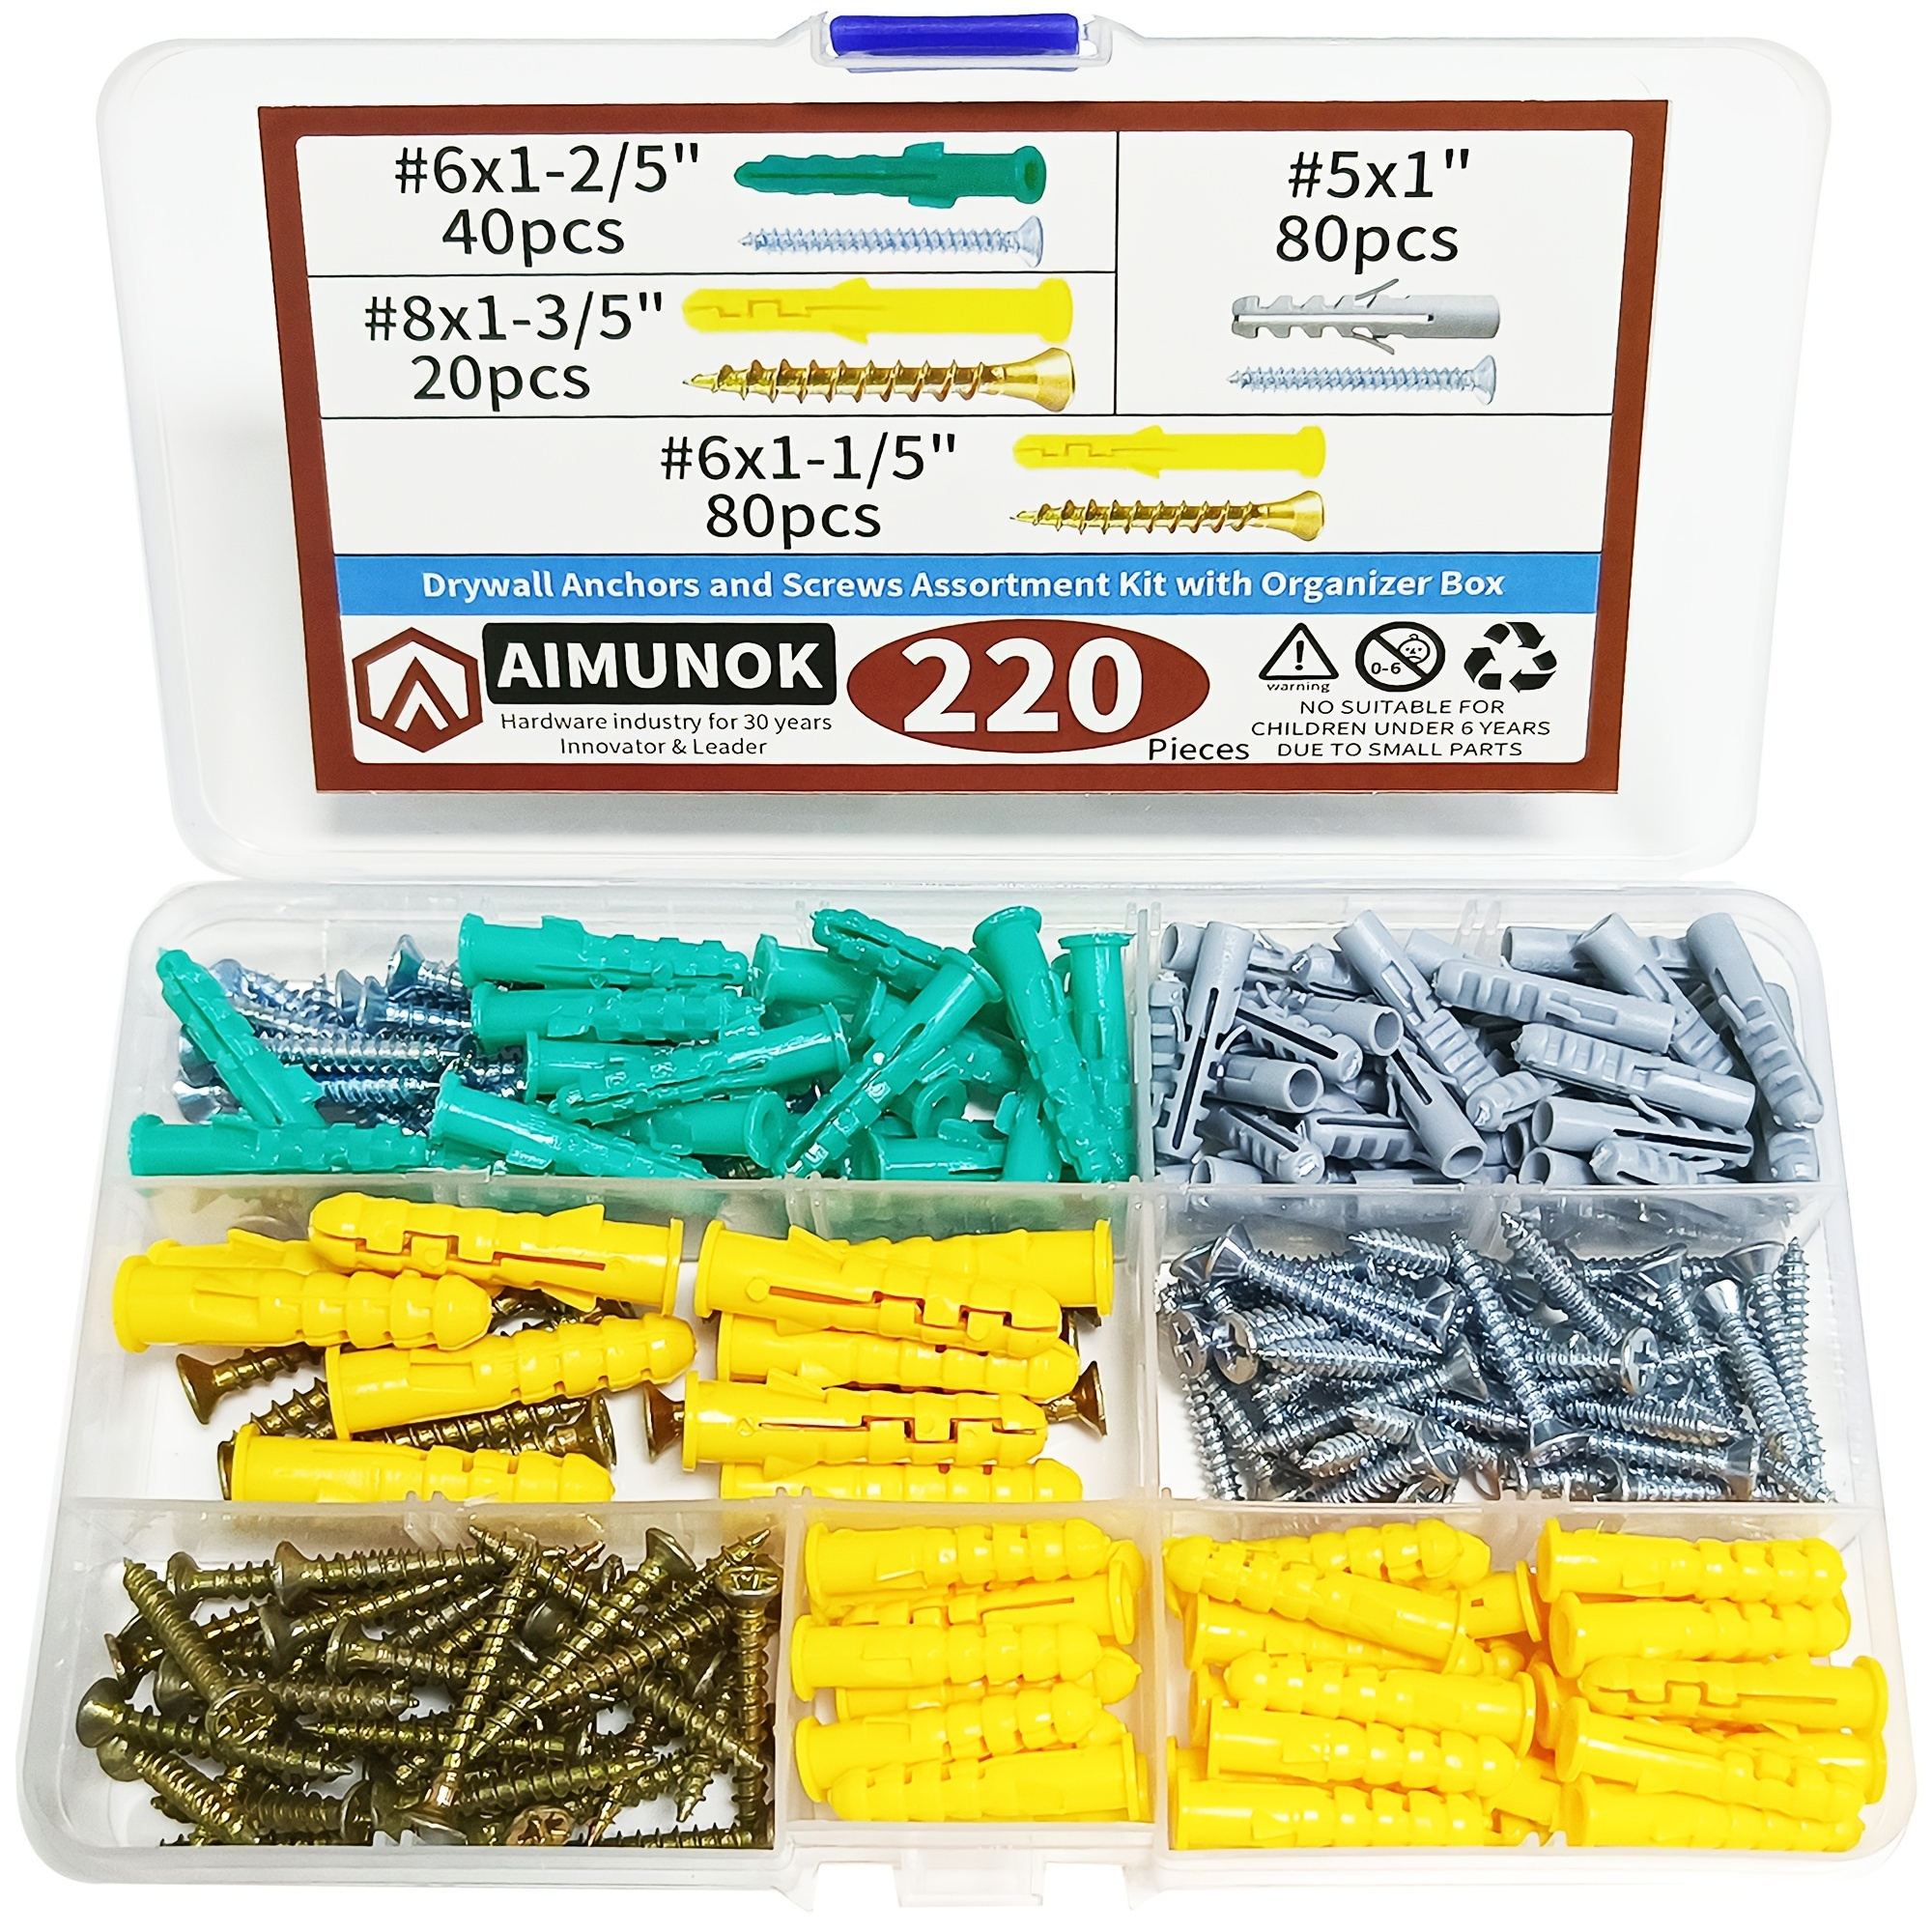 

220pcs Aimunok Drywall Anchors And Screws Assortment Kit, 110 Plastic Wall Anchors And 110 Flat Head Screws, 4 Sizes Galvanized Screws And Wall Plug Bolts With Organizer Box